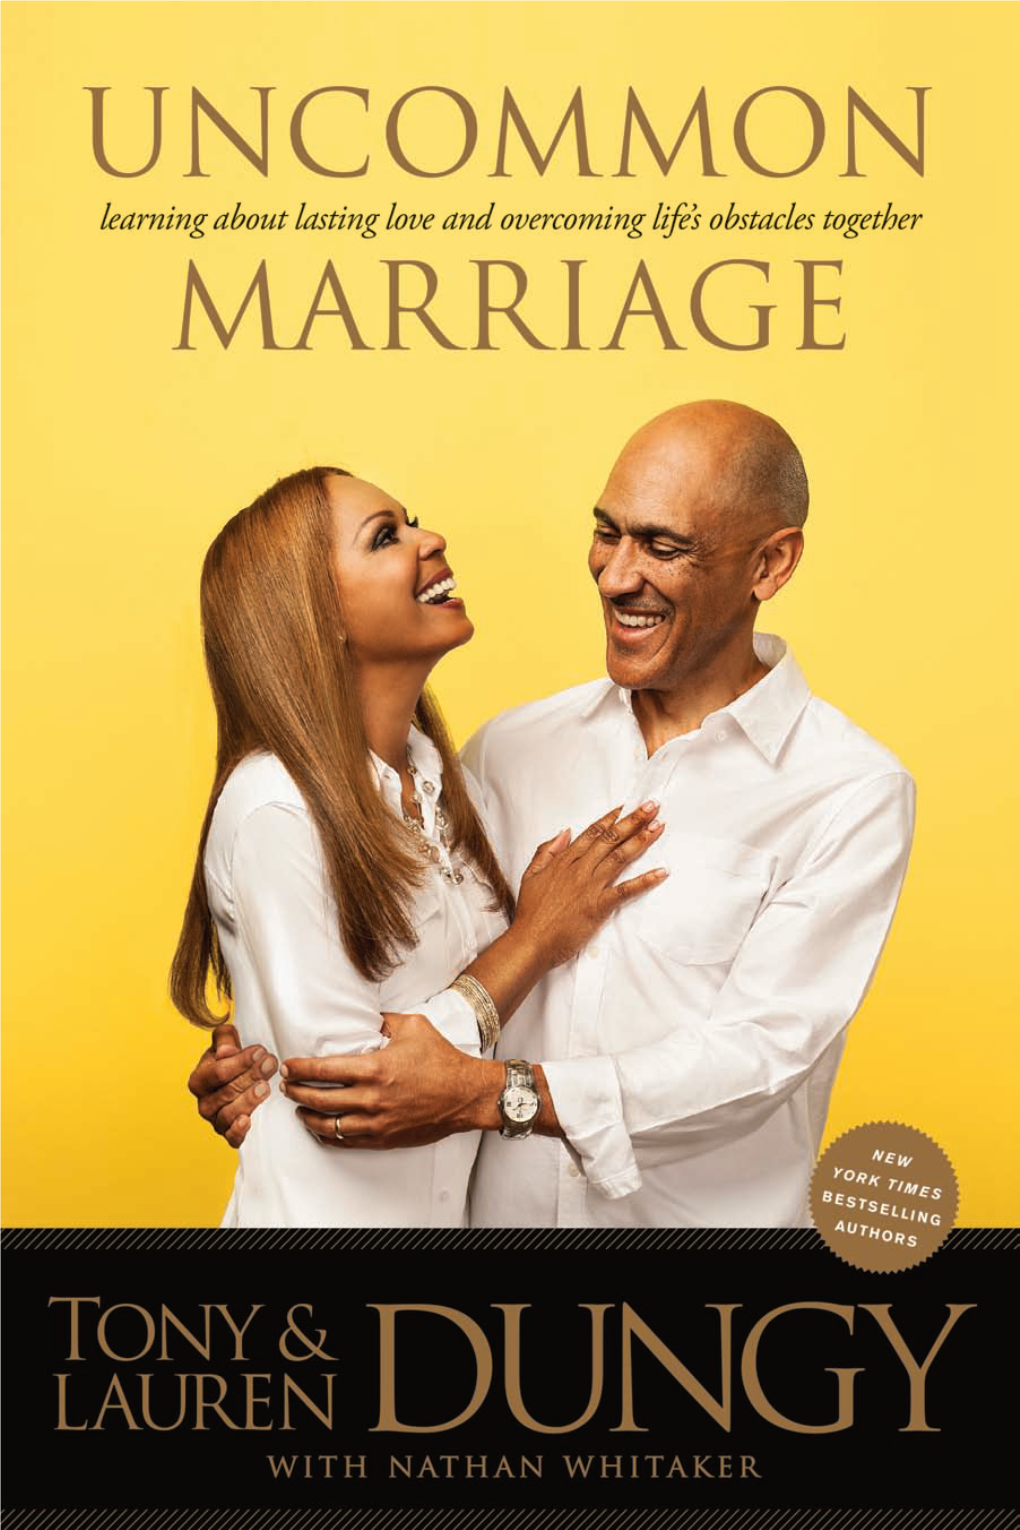 Uncommon Marriage Uncommon Learning About Lasting Love and Overcoming Life’S Obstacles Together Marriage